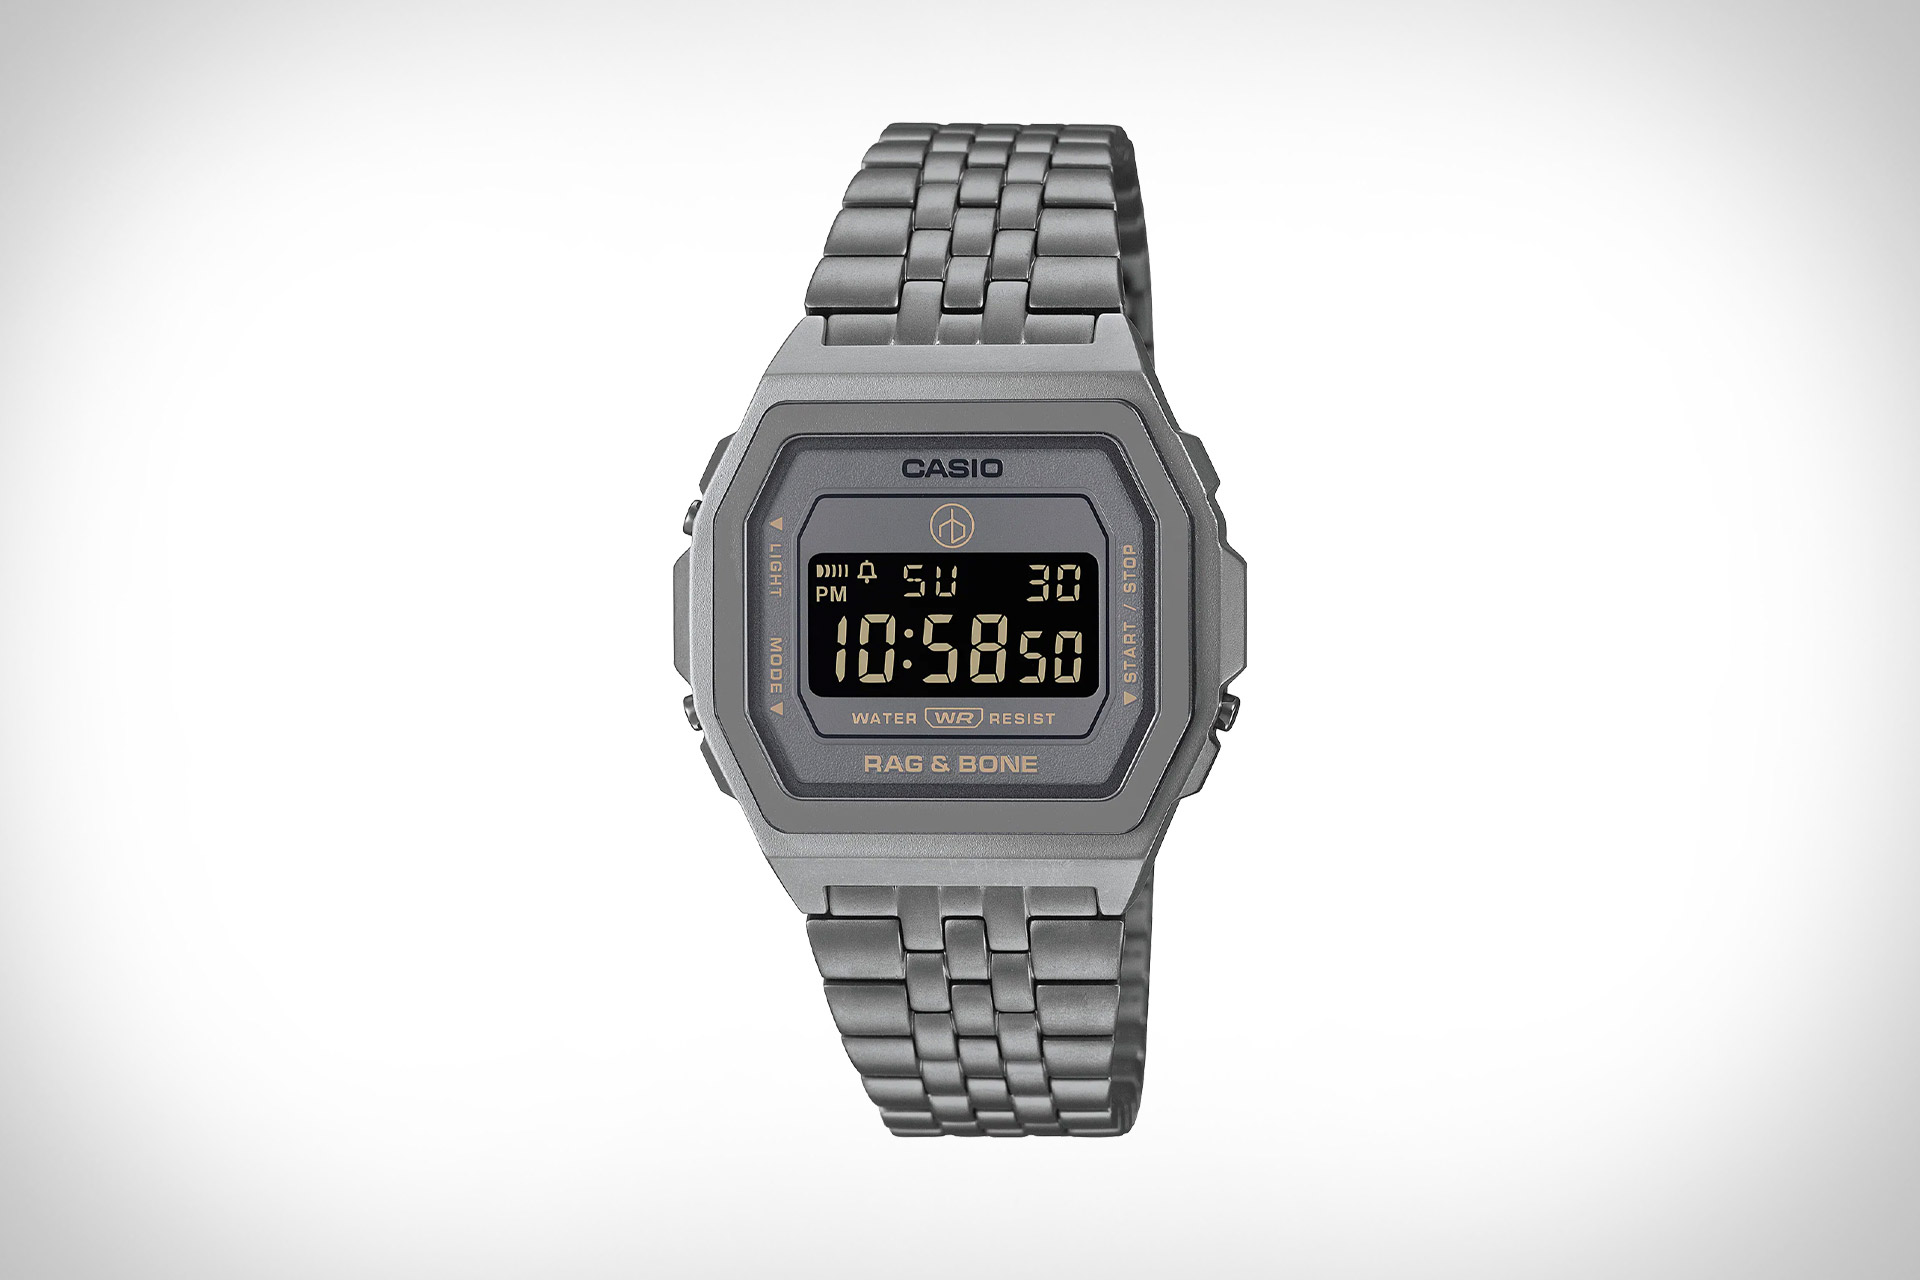 CASIO unveils limited-edition collaboration with rag & bone.